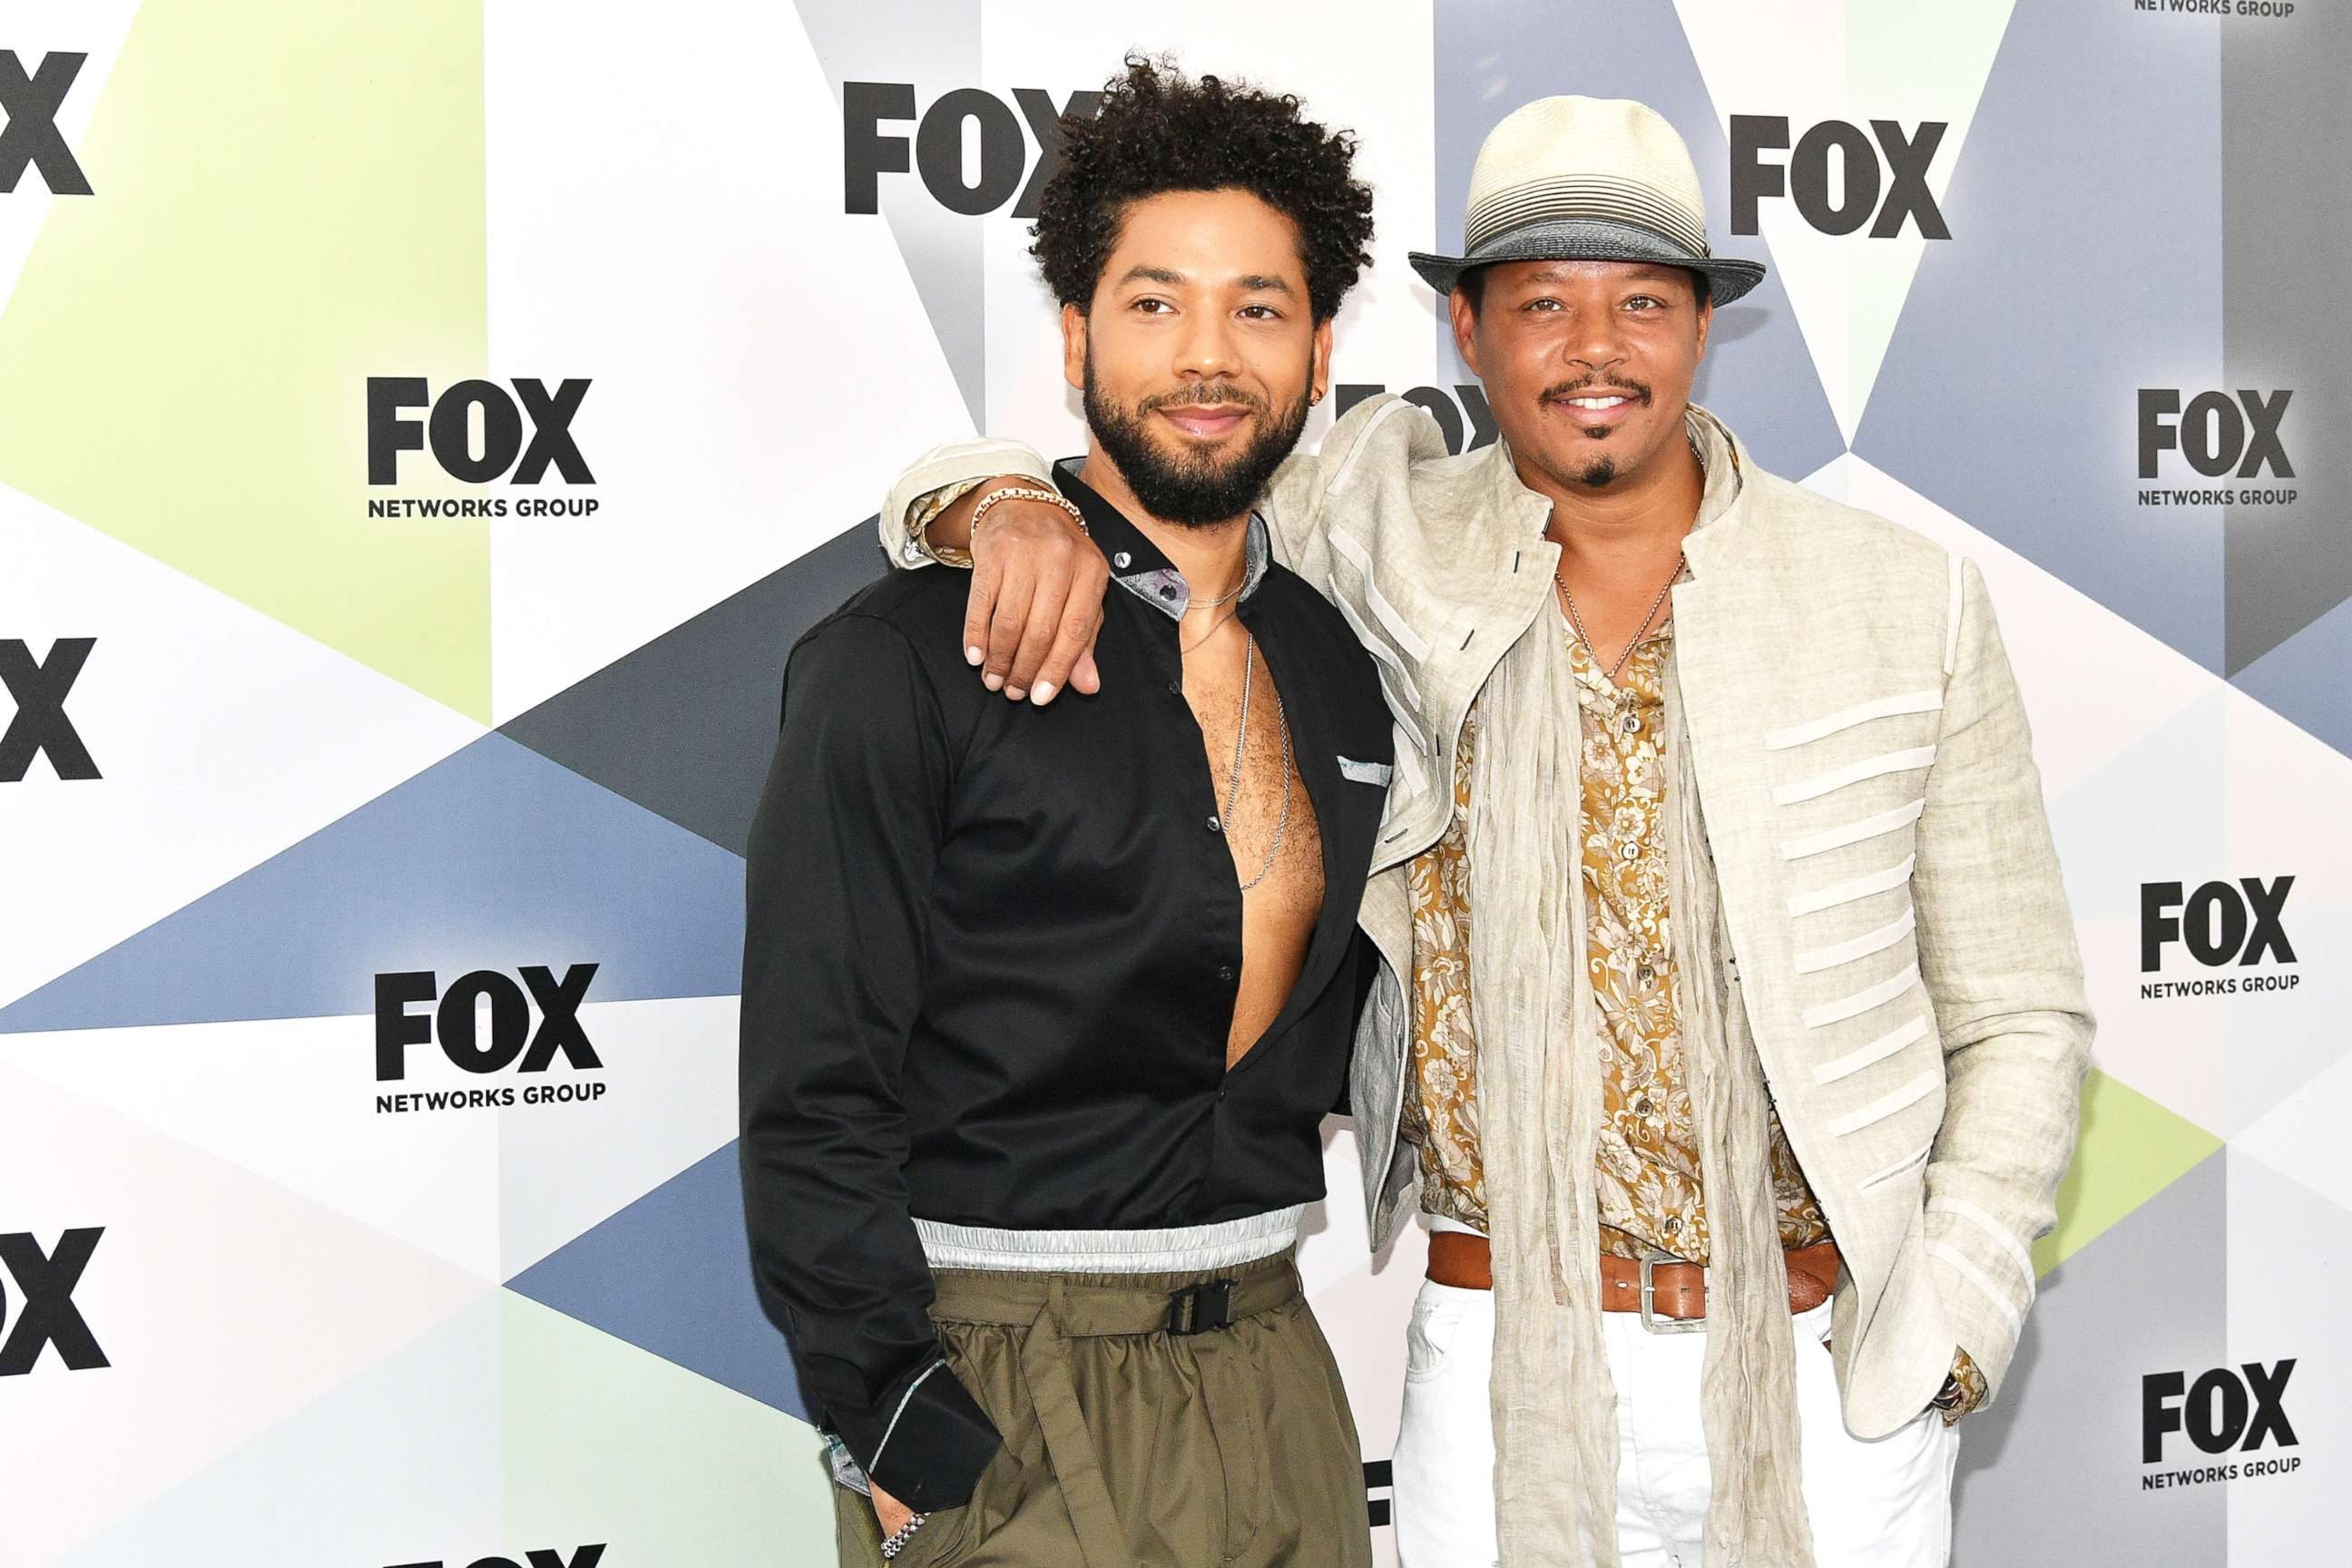 PHOTO: Jussie Smollett (left) and Terrence Howard attend an event on May 14, 2018, in New York City.